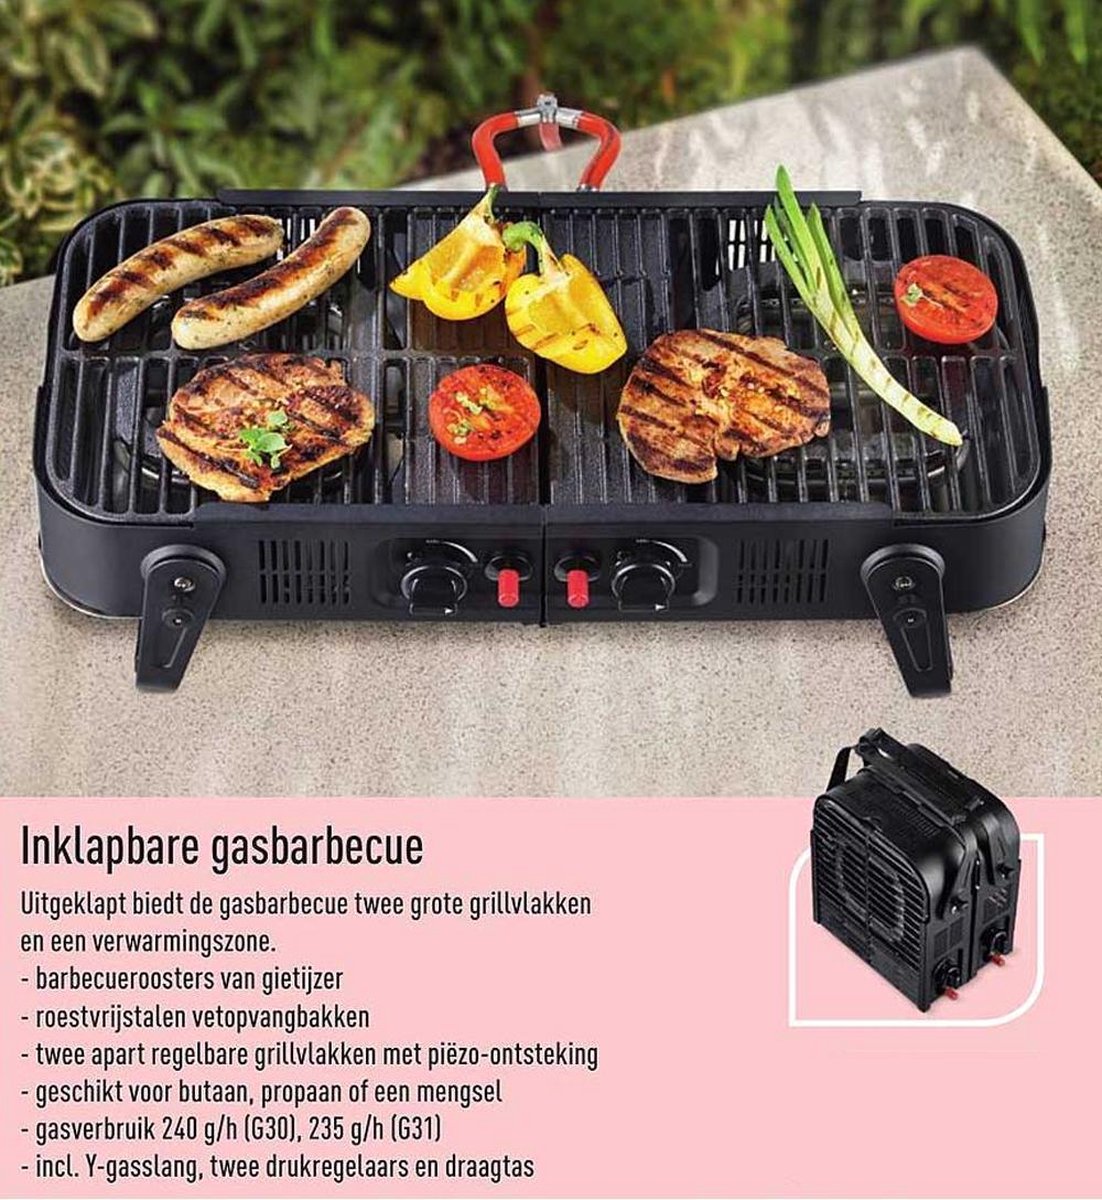 bol.com | Grill Time! Inklapbare Gasbarbecue | Inclusief Draagtas